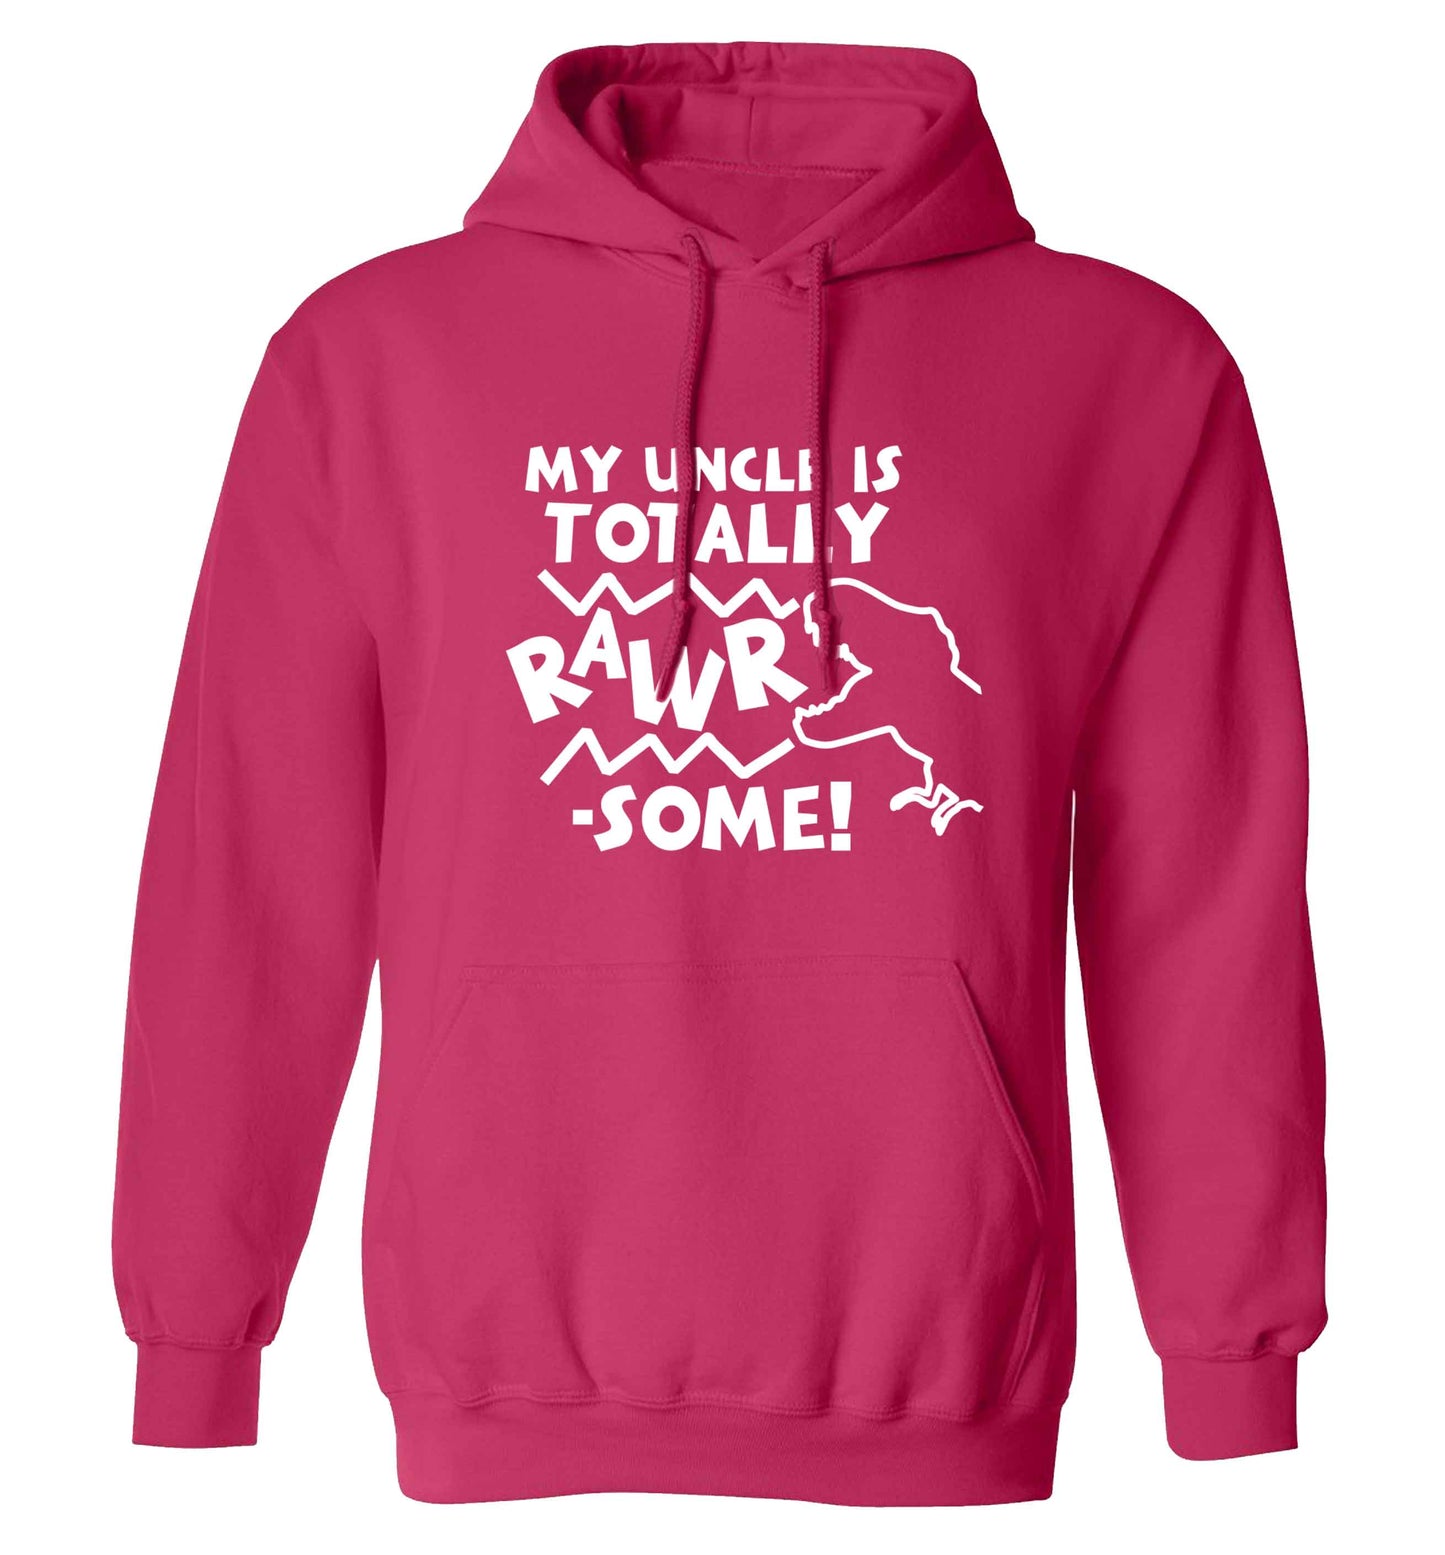 My uncle is totally rawrsome adults unisex pink hoodie 2XL